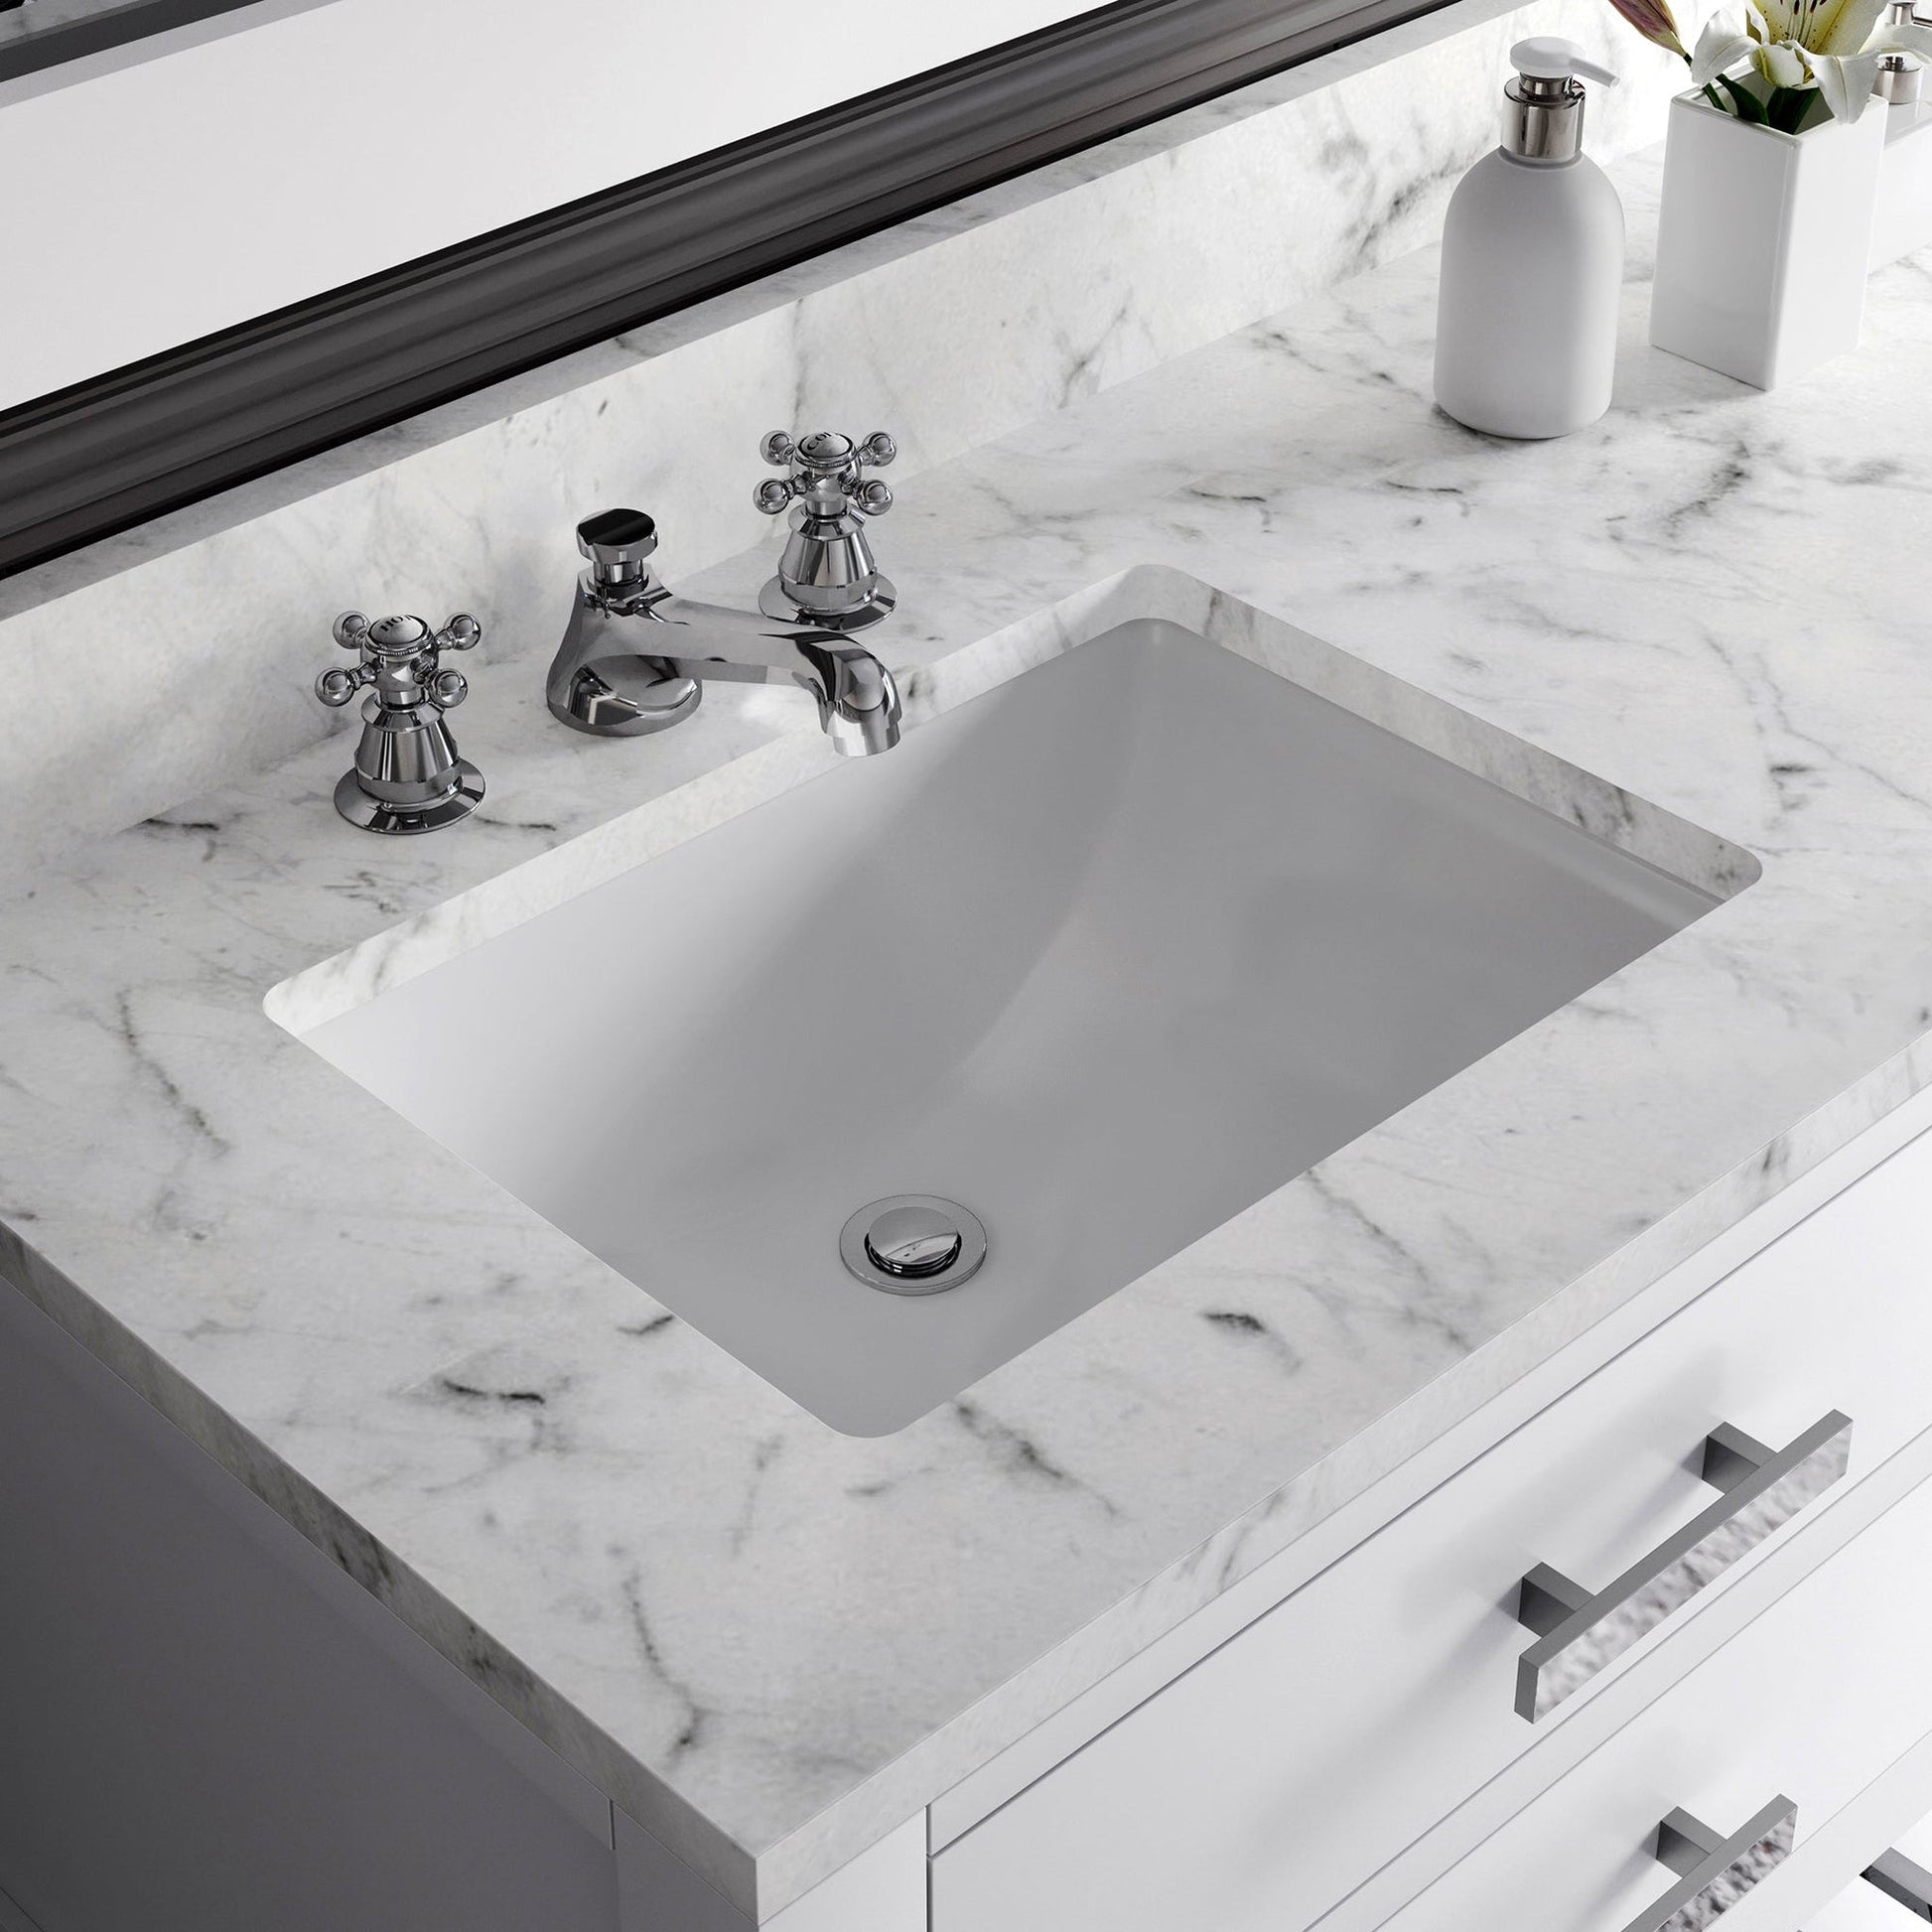 Water Creation Madalyn 72" Pure White Double Sink Bathroom Vanity With 2 Matching Framed Mirrors And Faucets